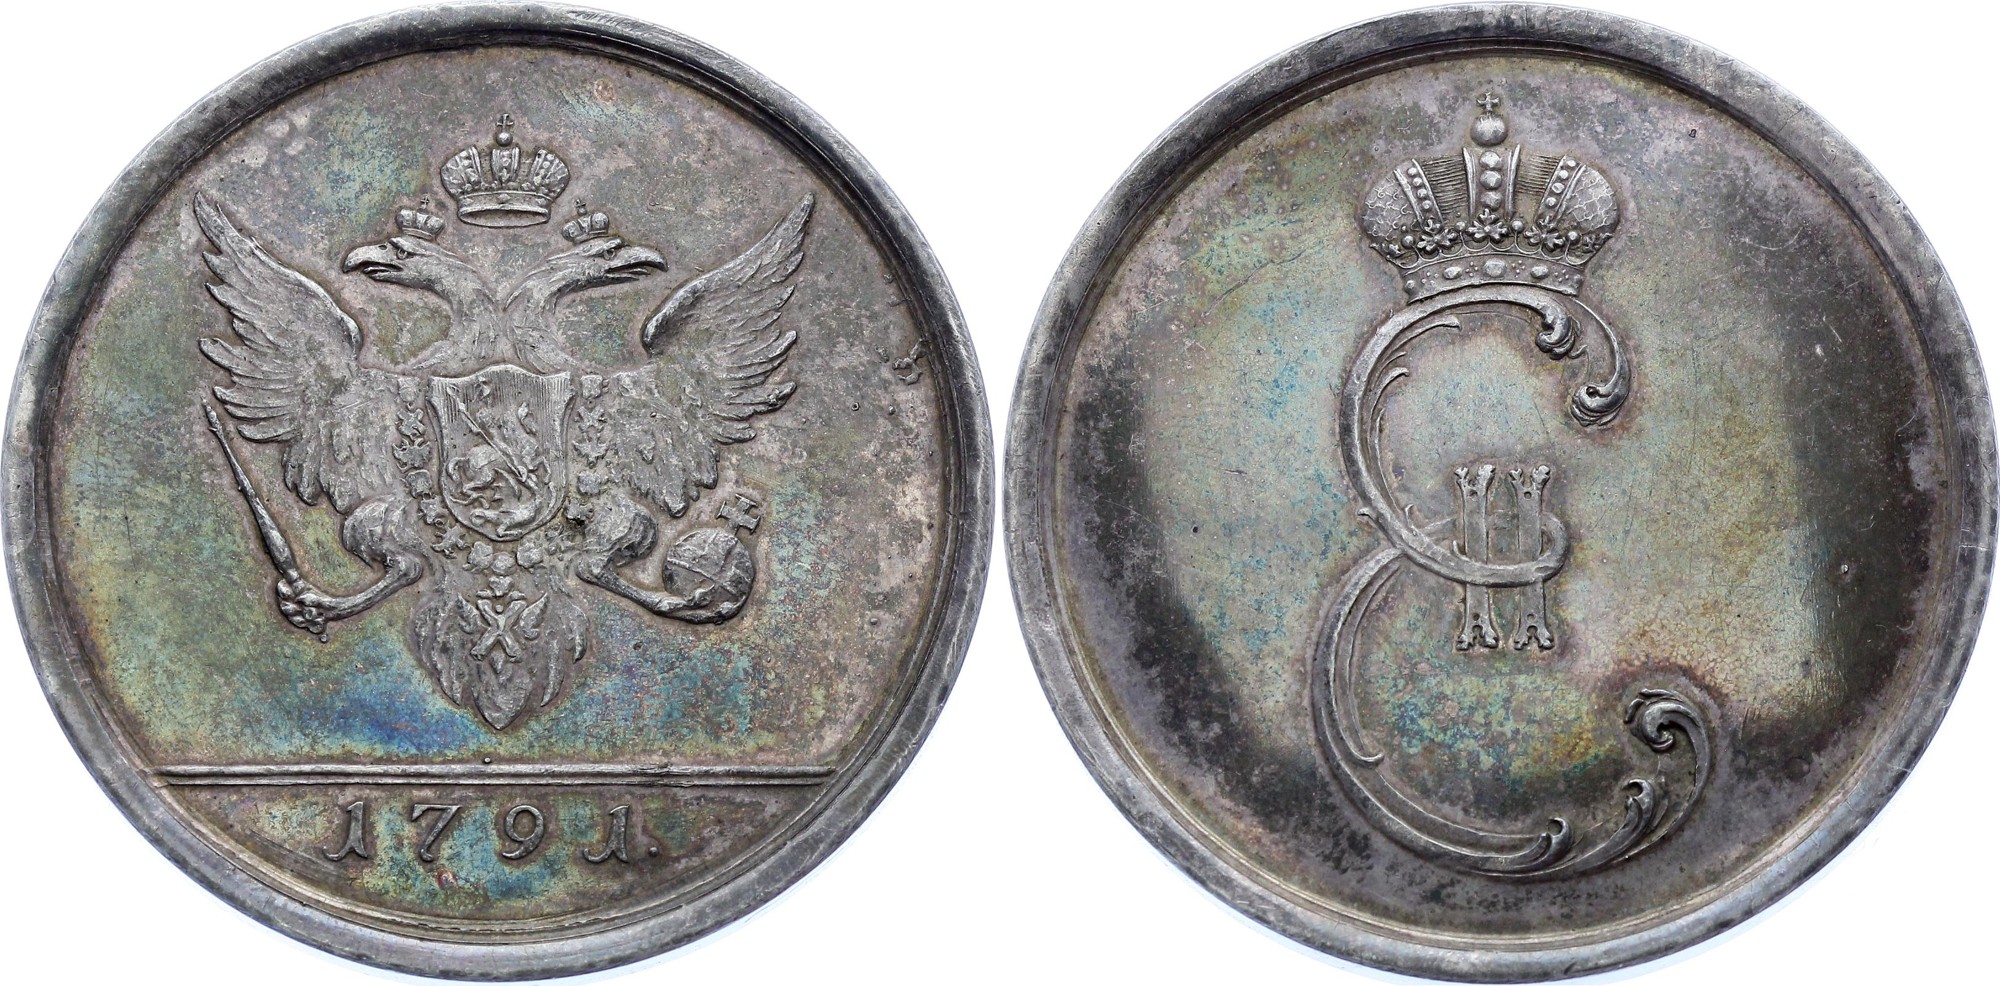 Russia Medal for the Chukchi 1791